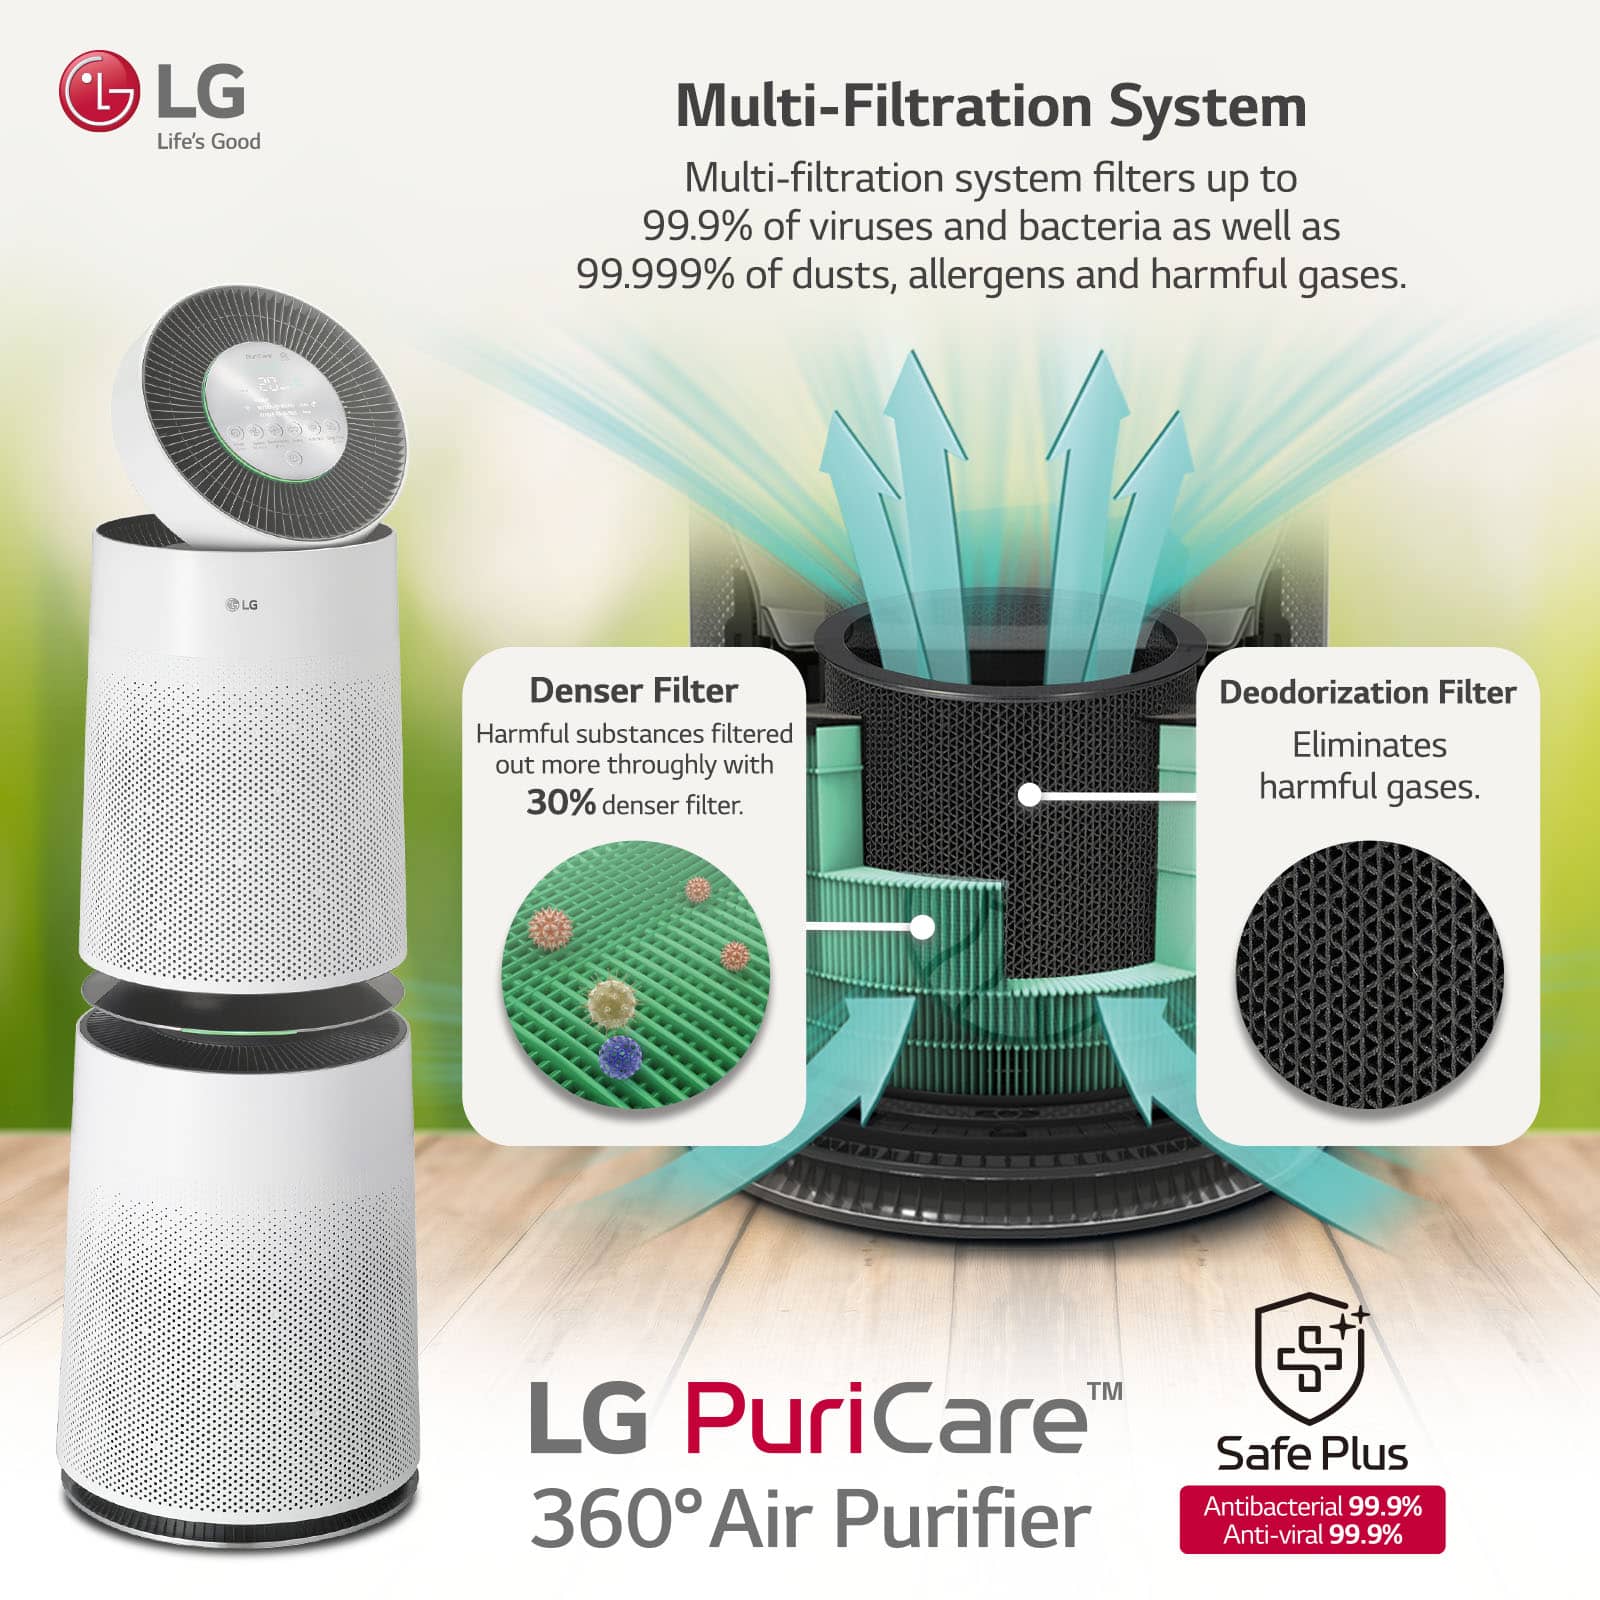 The LG PuriCare 360° Air Purifier is Upgraded with Enhanced Filter